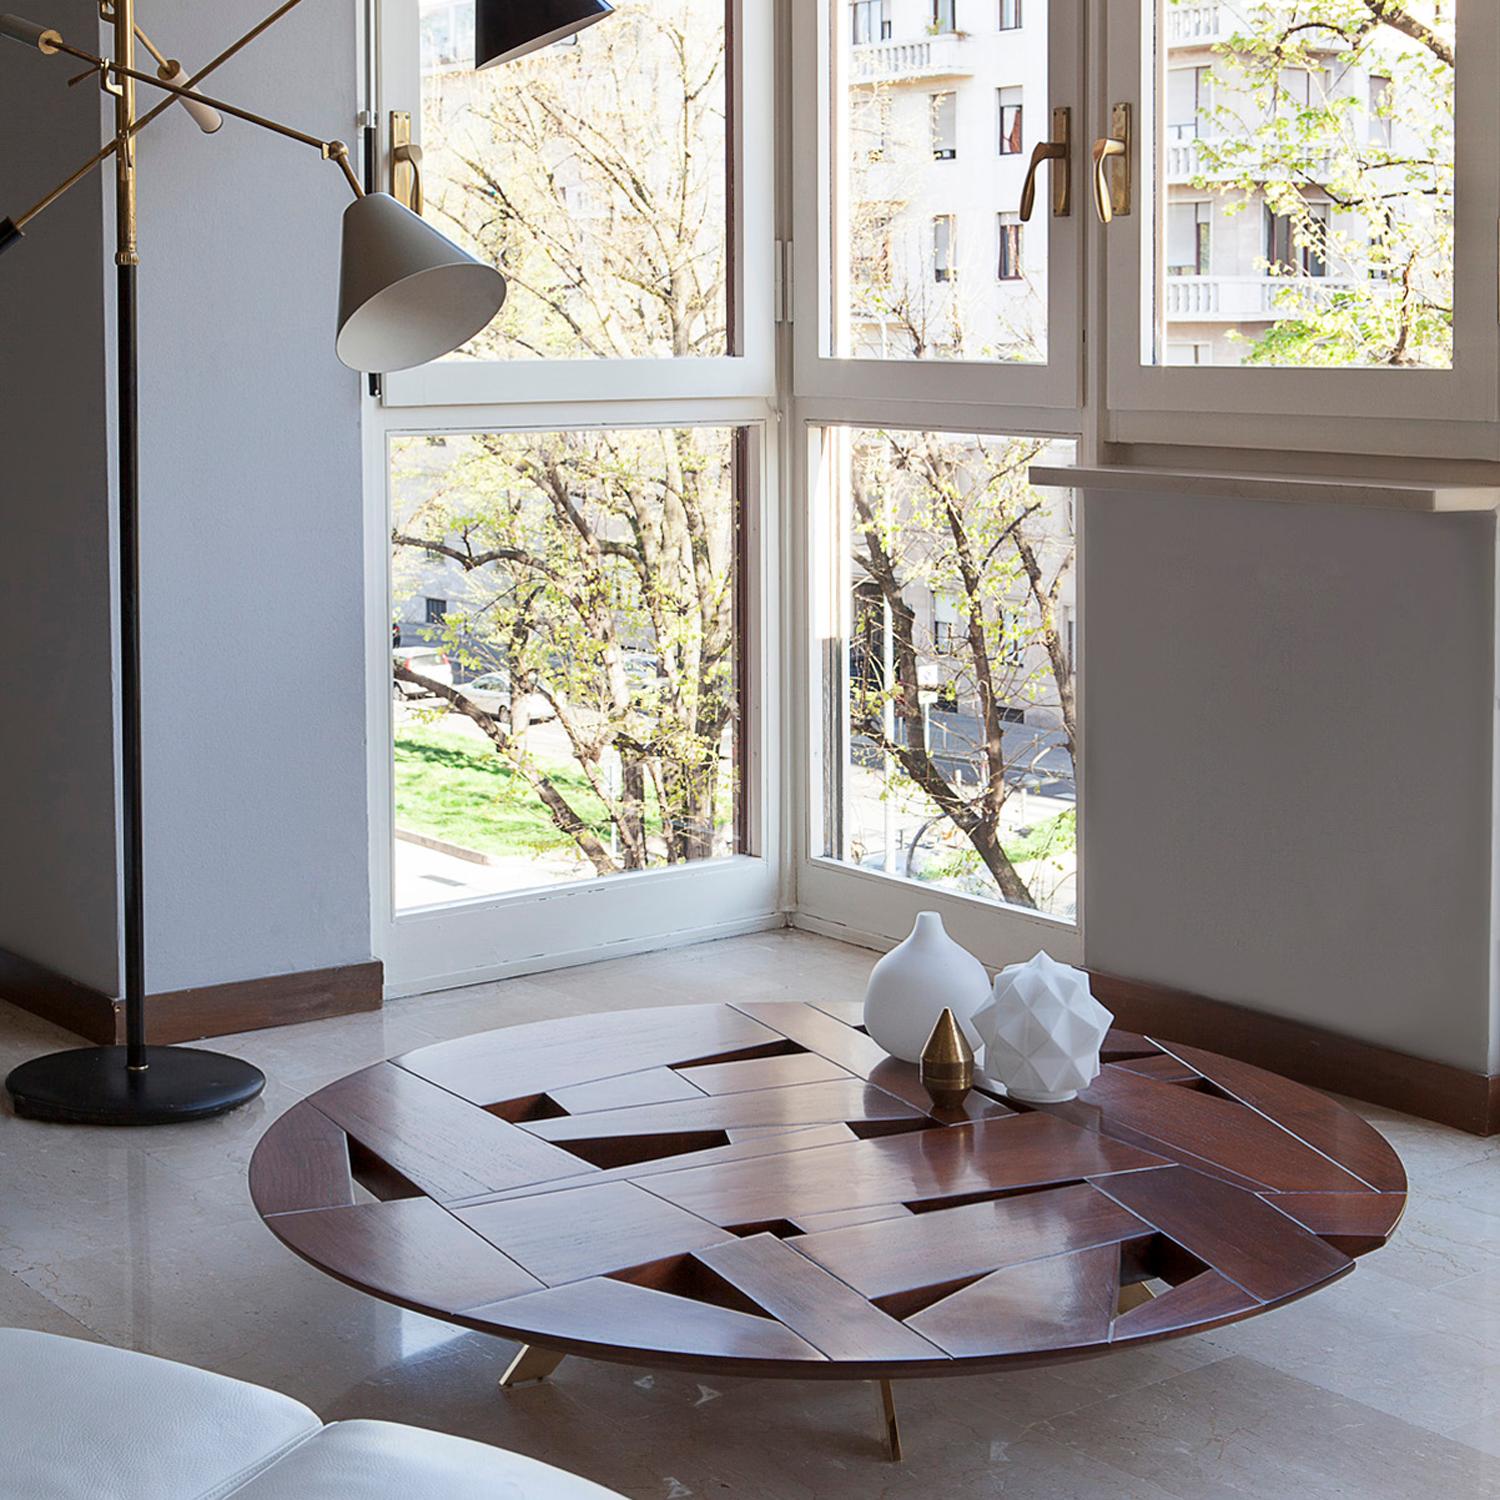 Marco Zanuso Jr for Fragile Edizioni, low table in solid walnut and polished brass feet, it was part of a series of products, mainly remained unique pieces, presented in 2015. The color of actual table is medium walnut, in between the two shades in